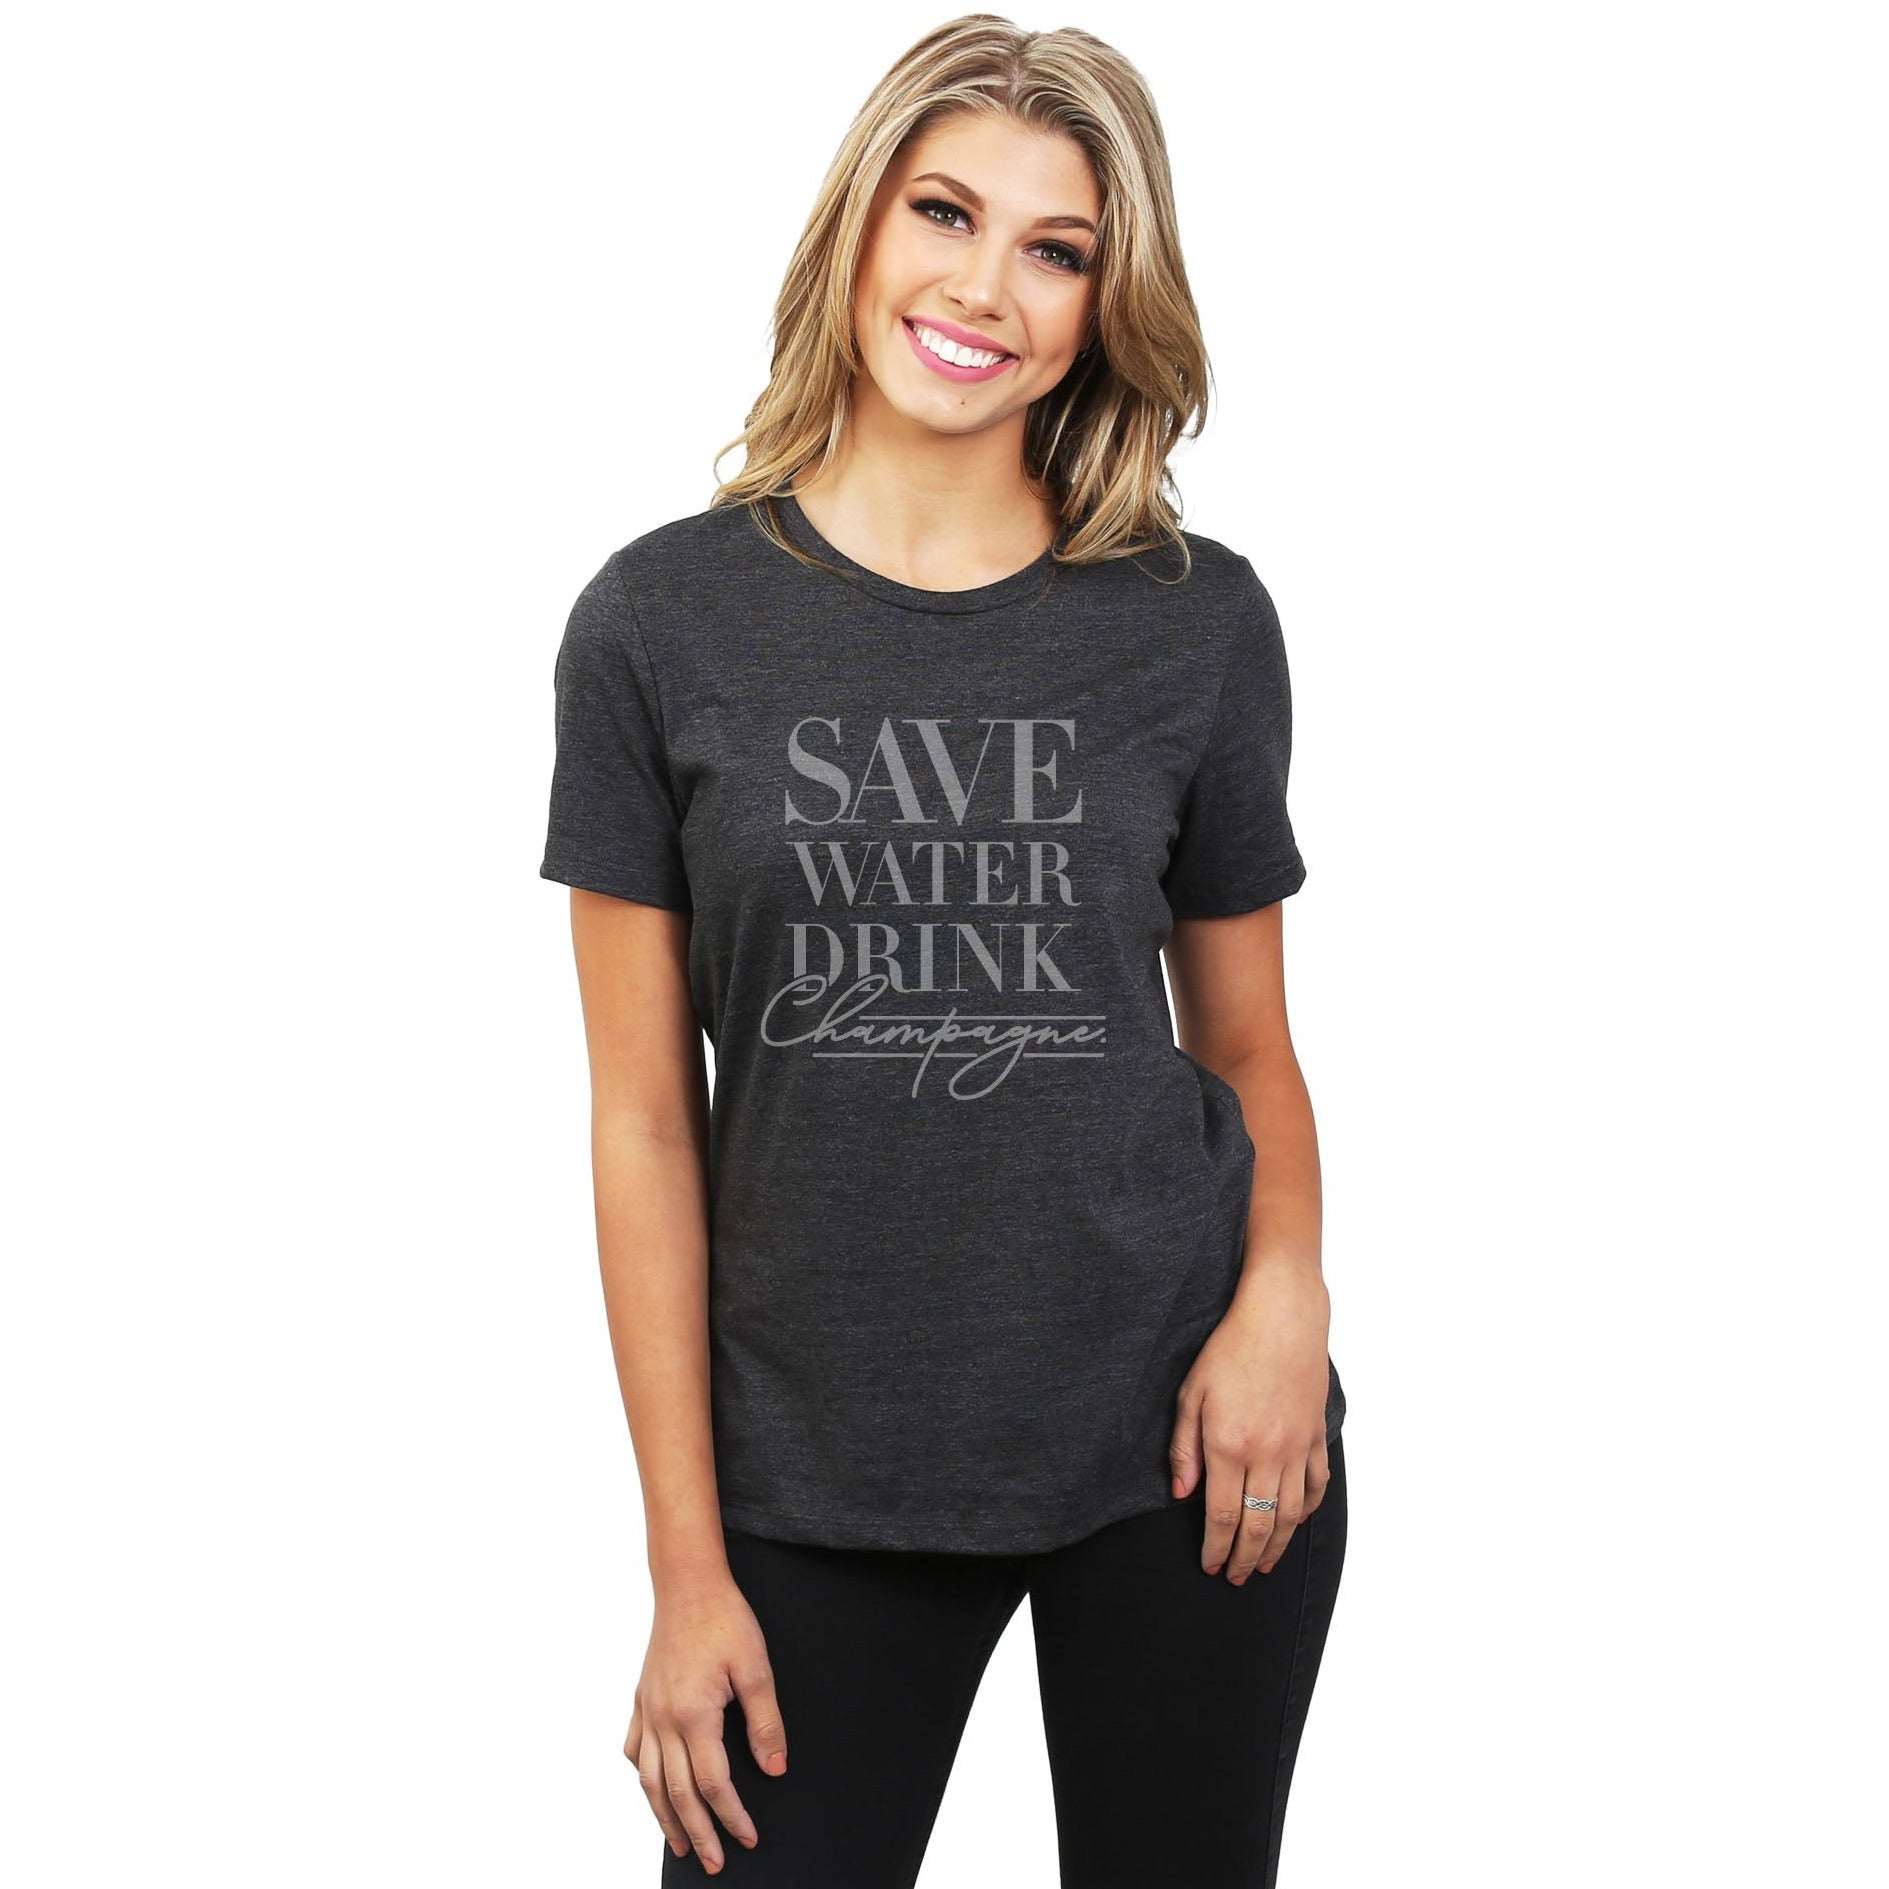 Save Water Drink Champagne Women's Relaxed Crewneck T-Shirt Top Tee Charcoal Grey Model